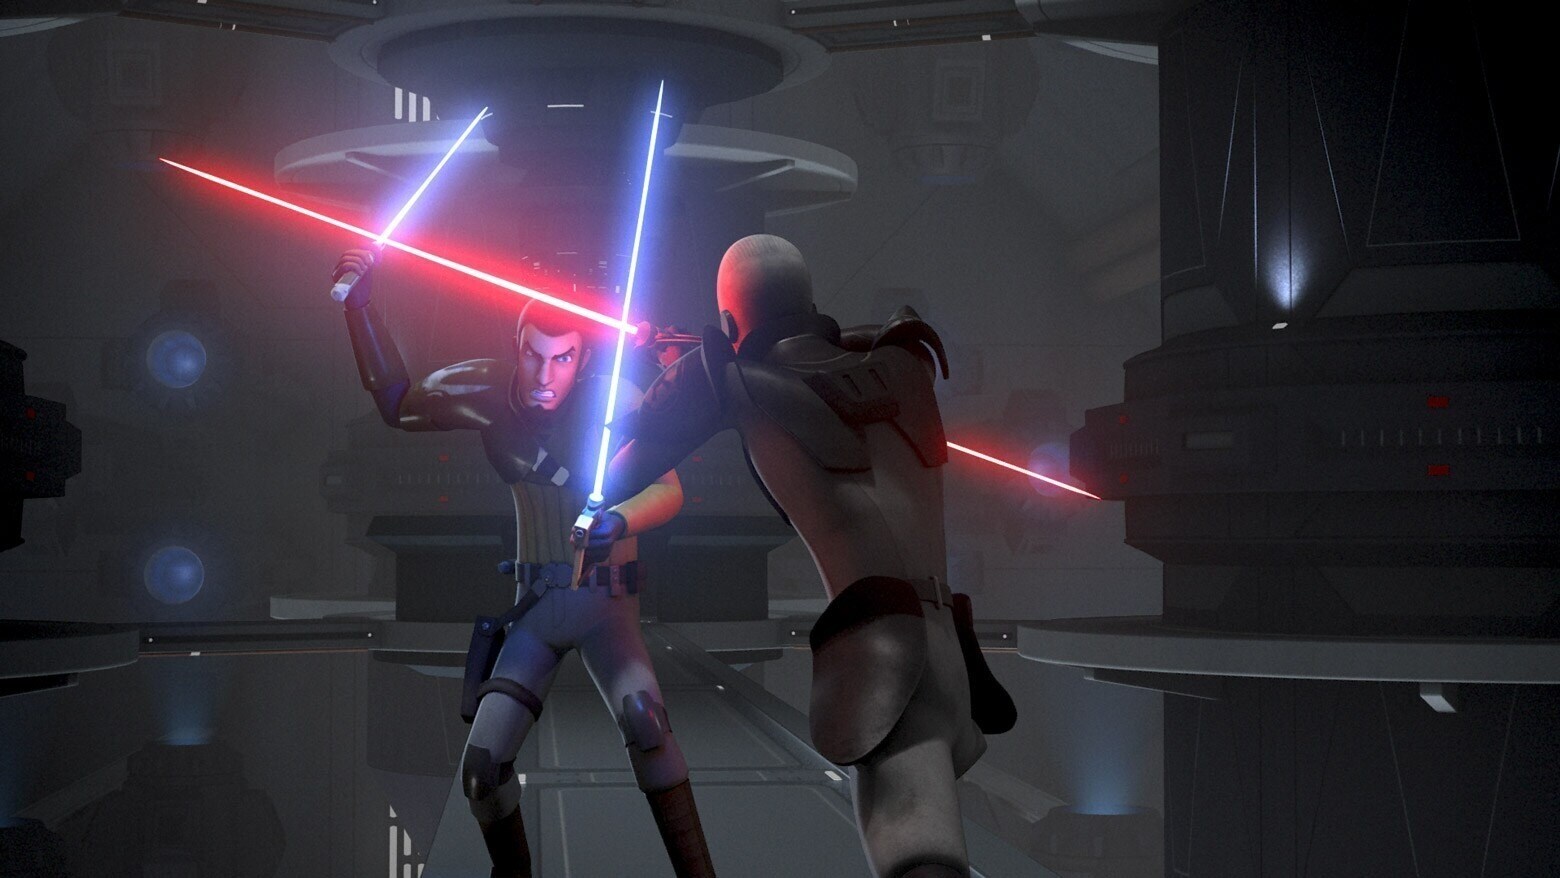 Kanan and the Inquisitor fighting with light sabers in Star Wars Rebels